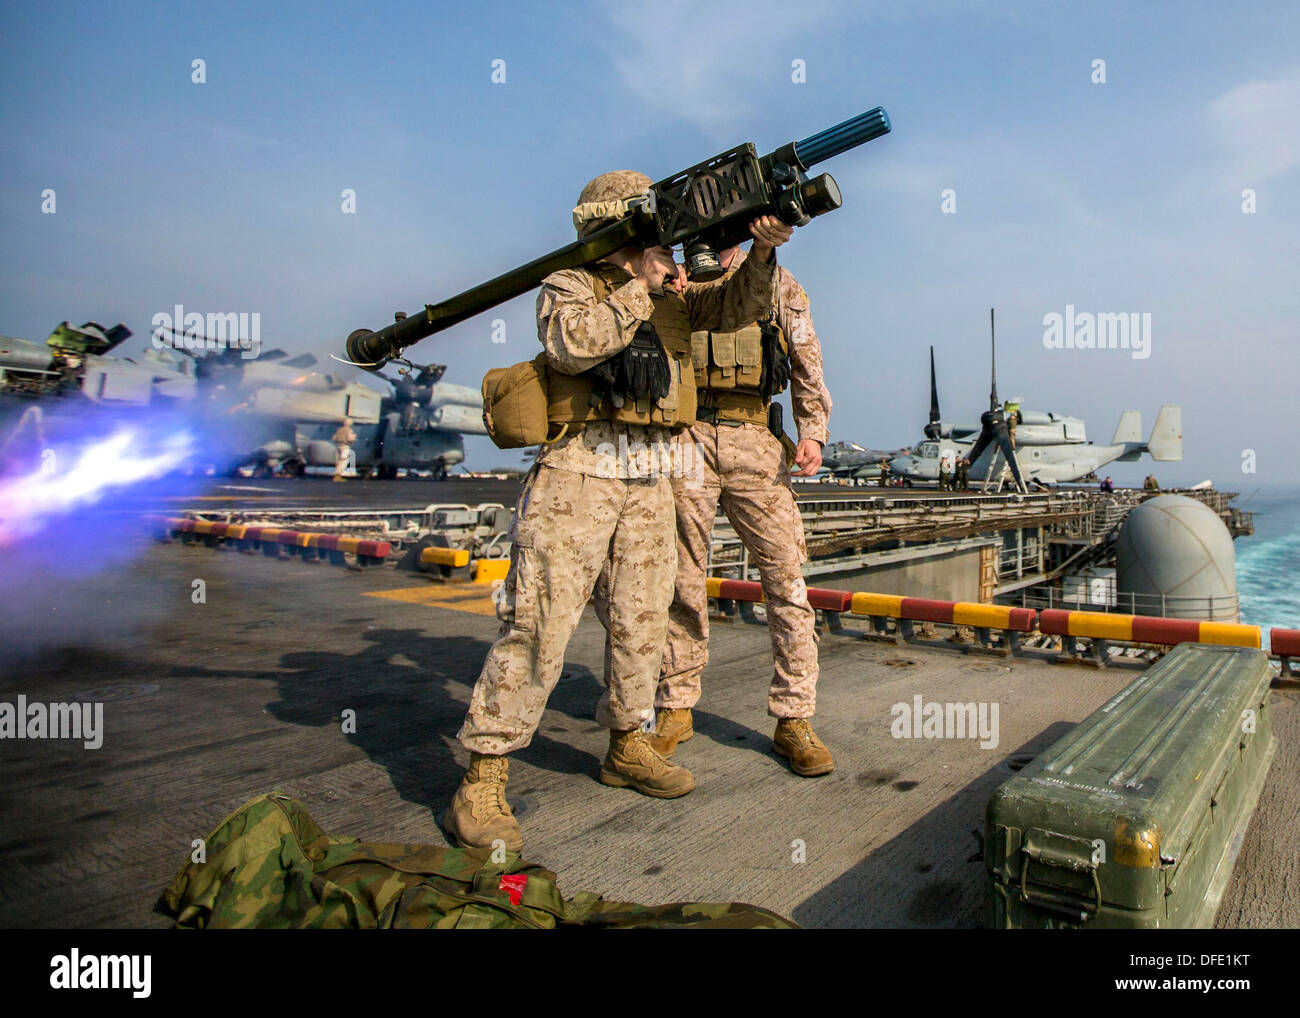 us-marines-fire-a-stinger-shoulder-launched-anti-aircraft-missile-DFE1KT.jpg